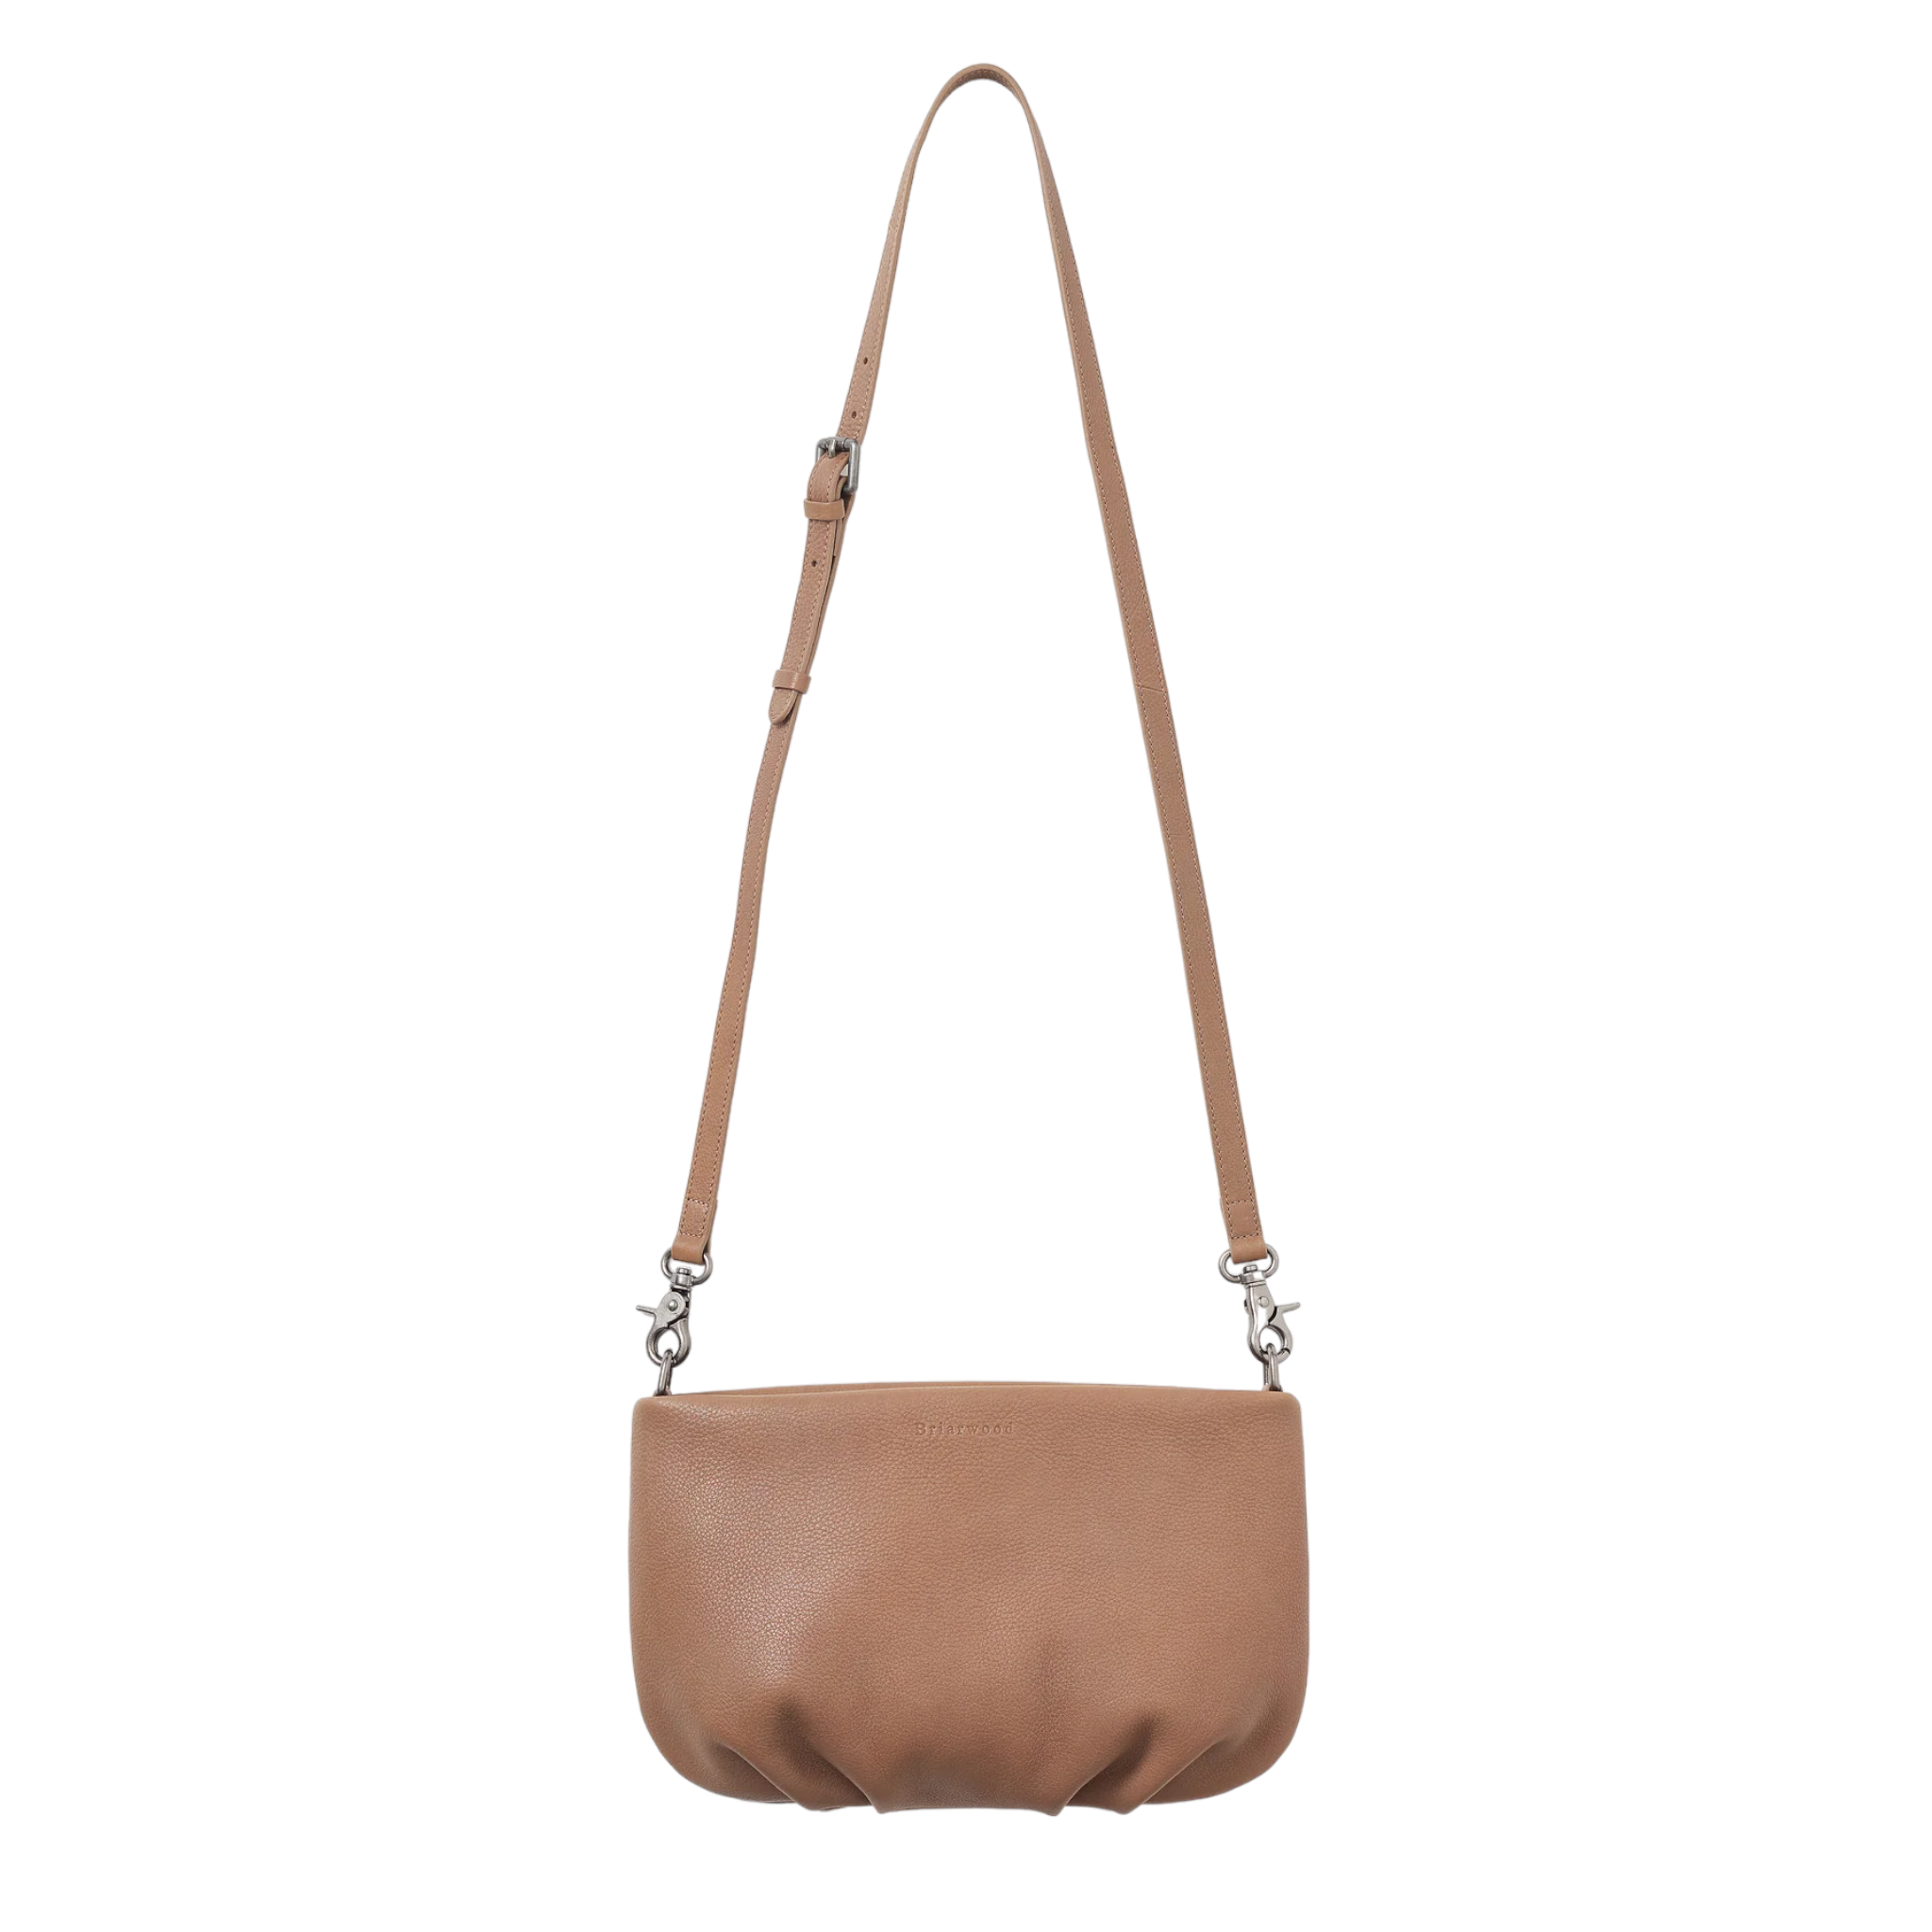 Shop Briarwood Sienna - with shoe&amp;me - from Briarwood - Bags - Handbag, Summer, Winter, Womens - [collection]